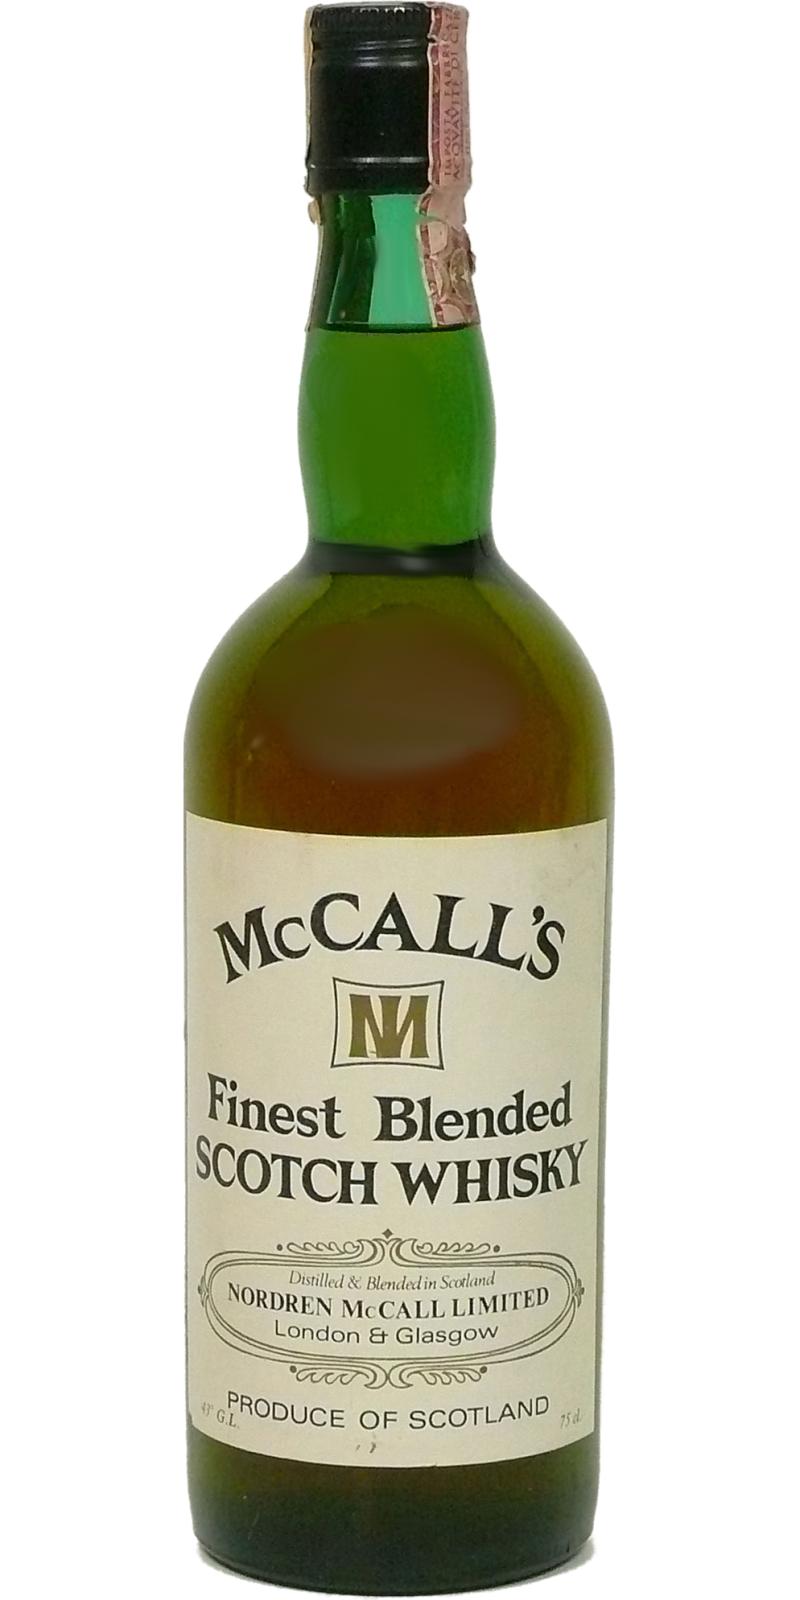 McCall's Finest Blended Scotch Whisky